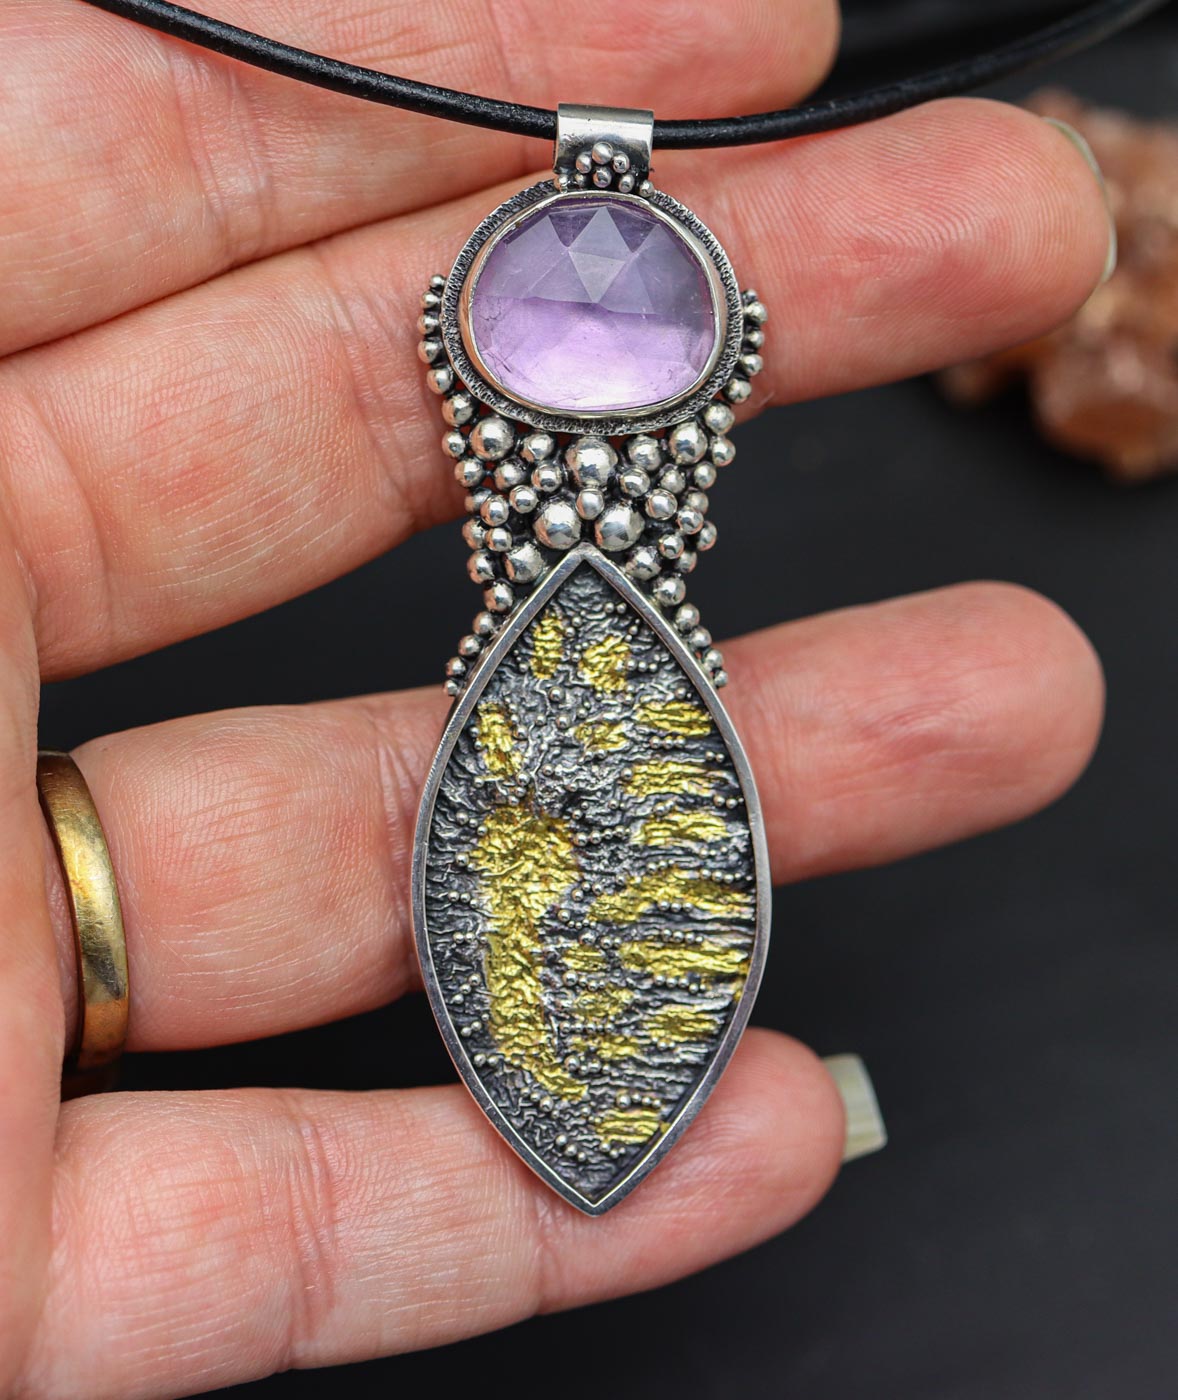 The Goddess Pendant #3 Amethyst Necklace Sterling Silver and 22k Gold